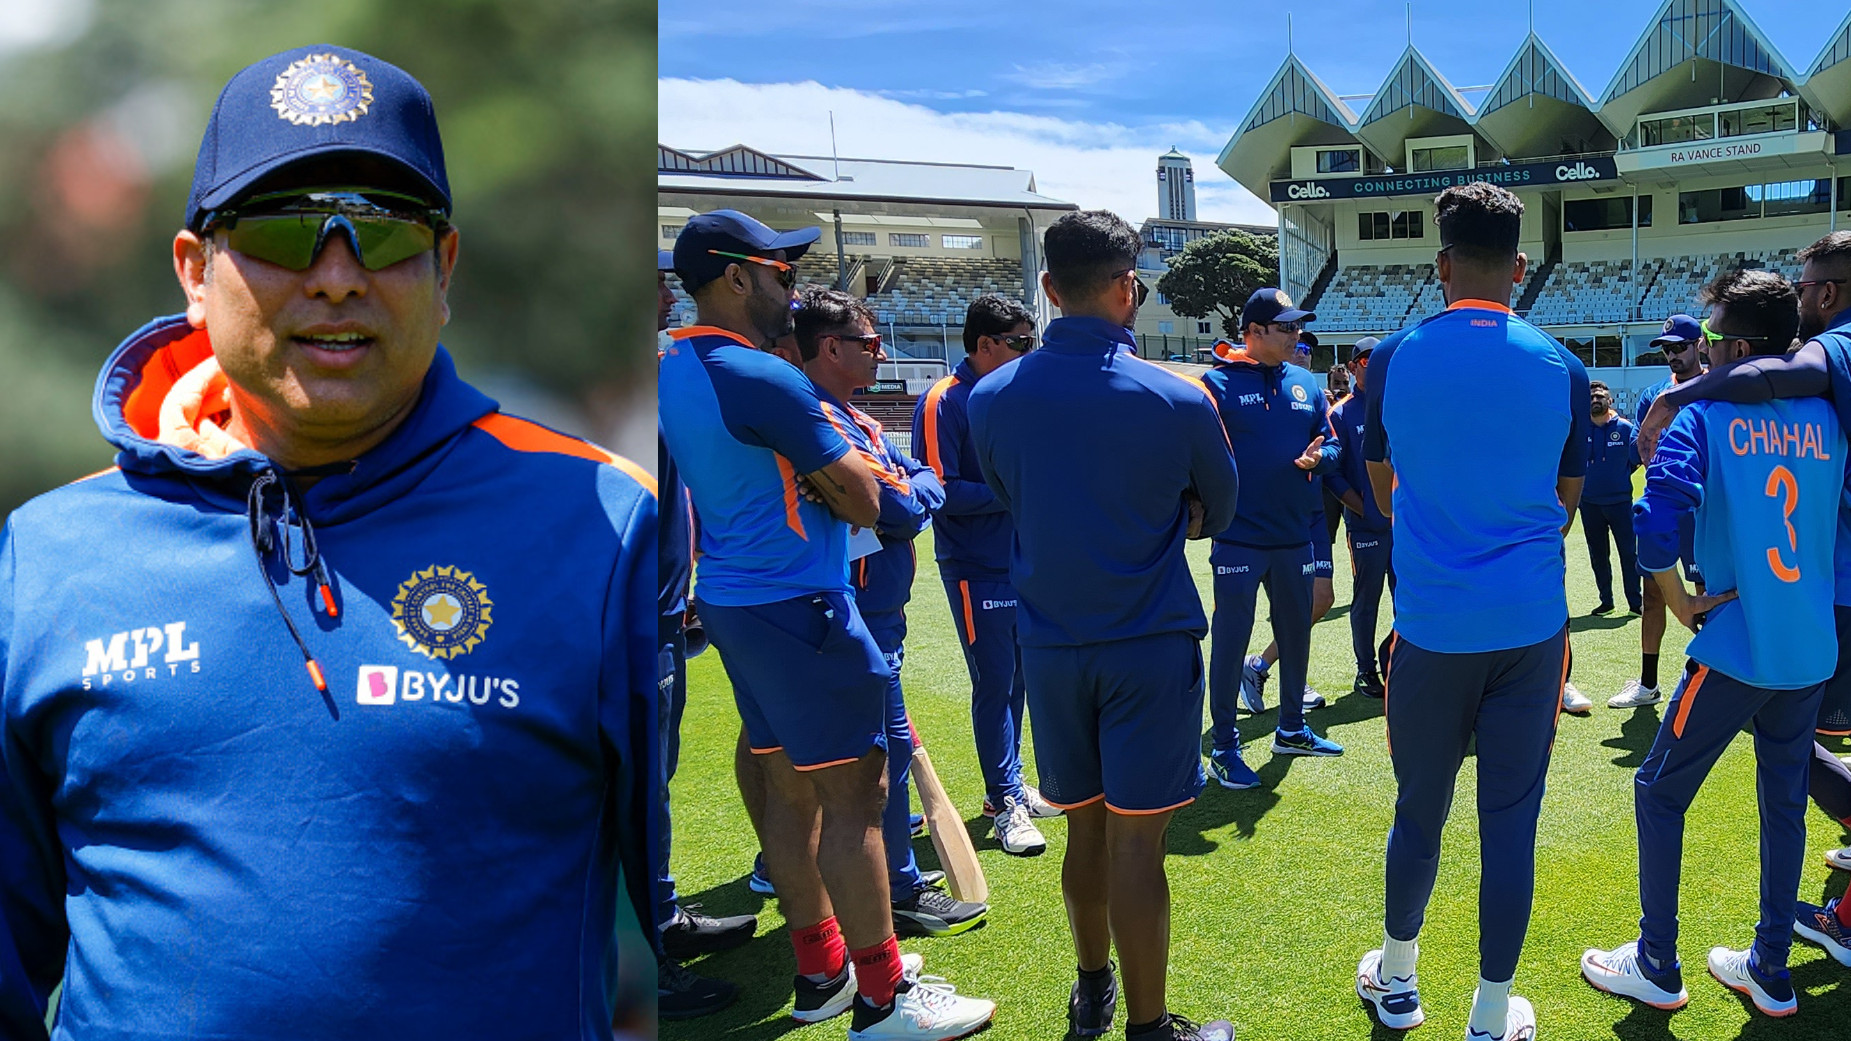 NZ v IND 2022: “Play with freedom and fearlessness”- VVS Laxman reveals his advice to India batters before 1st T20I